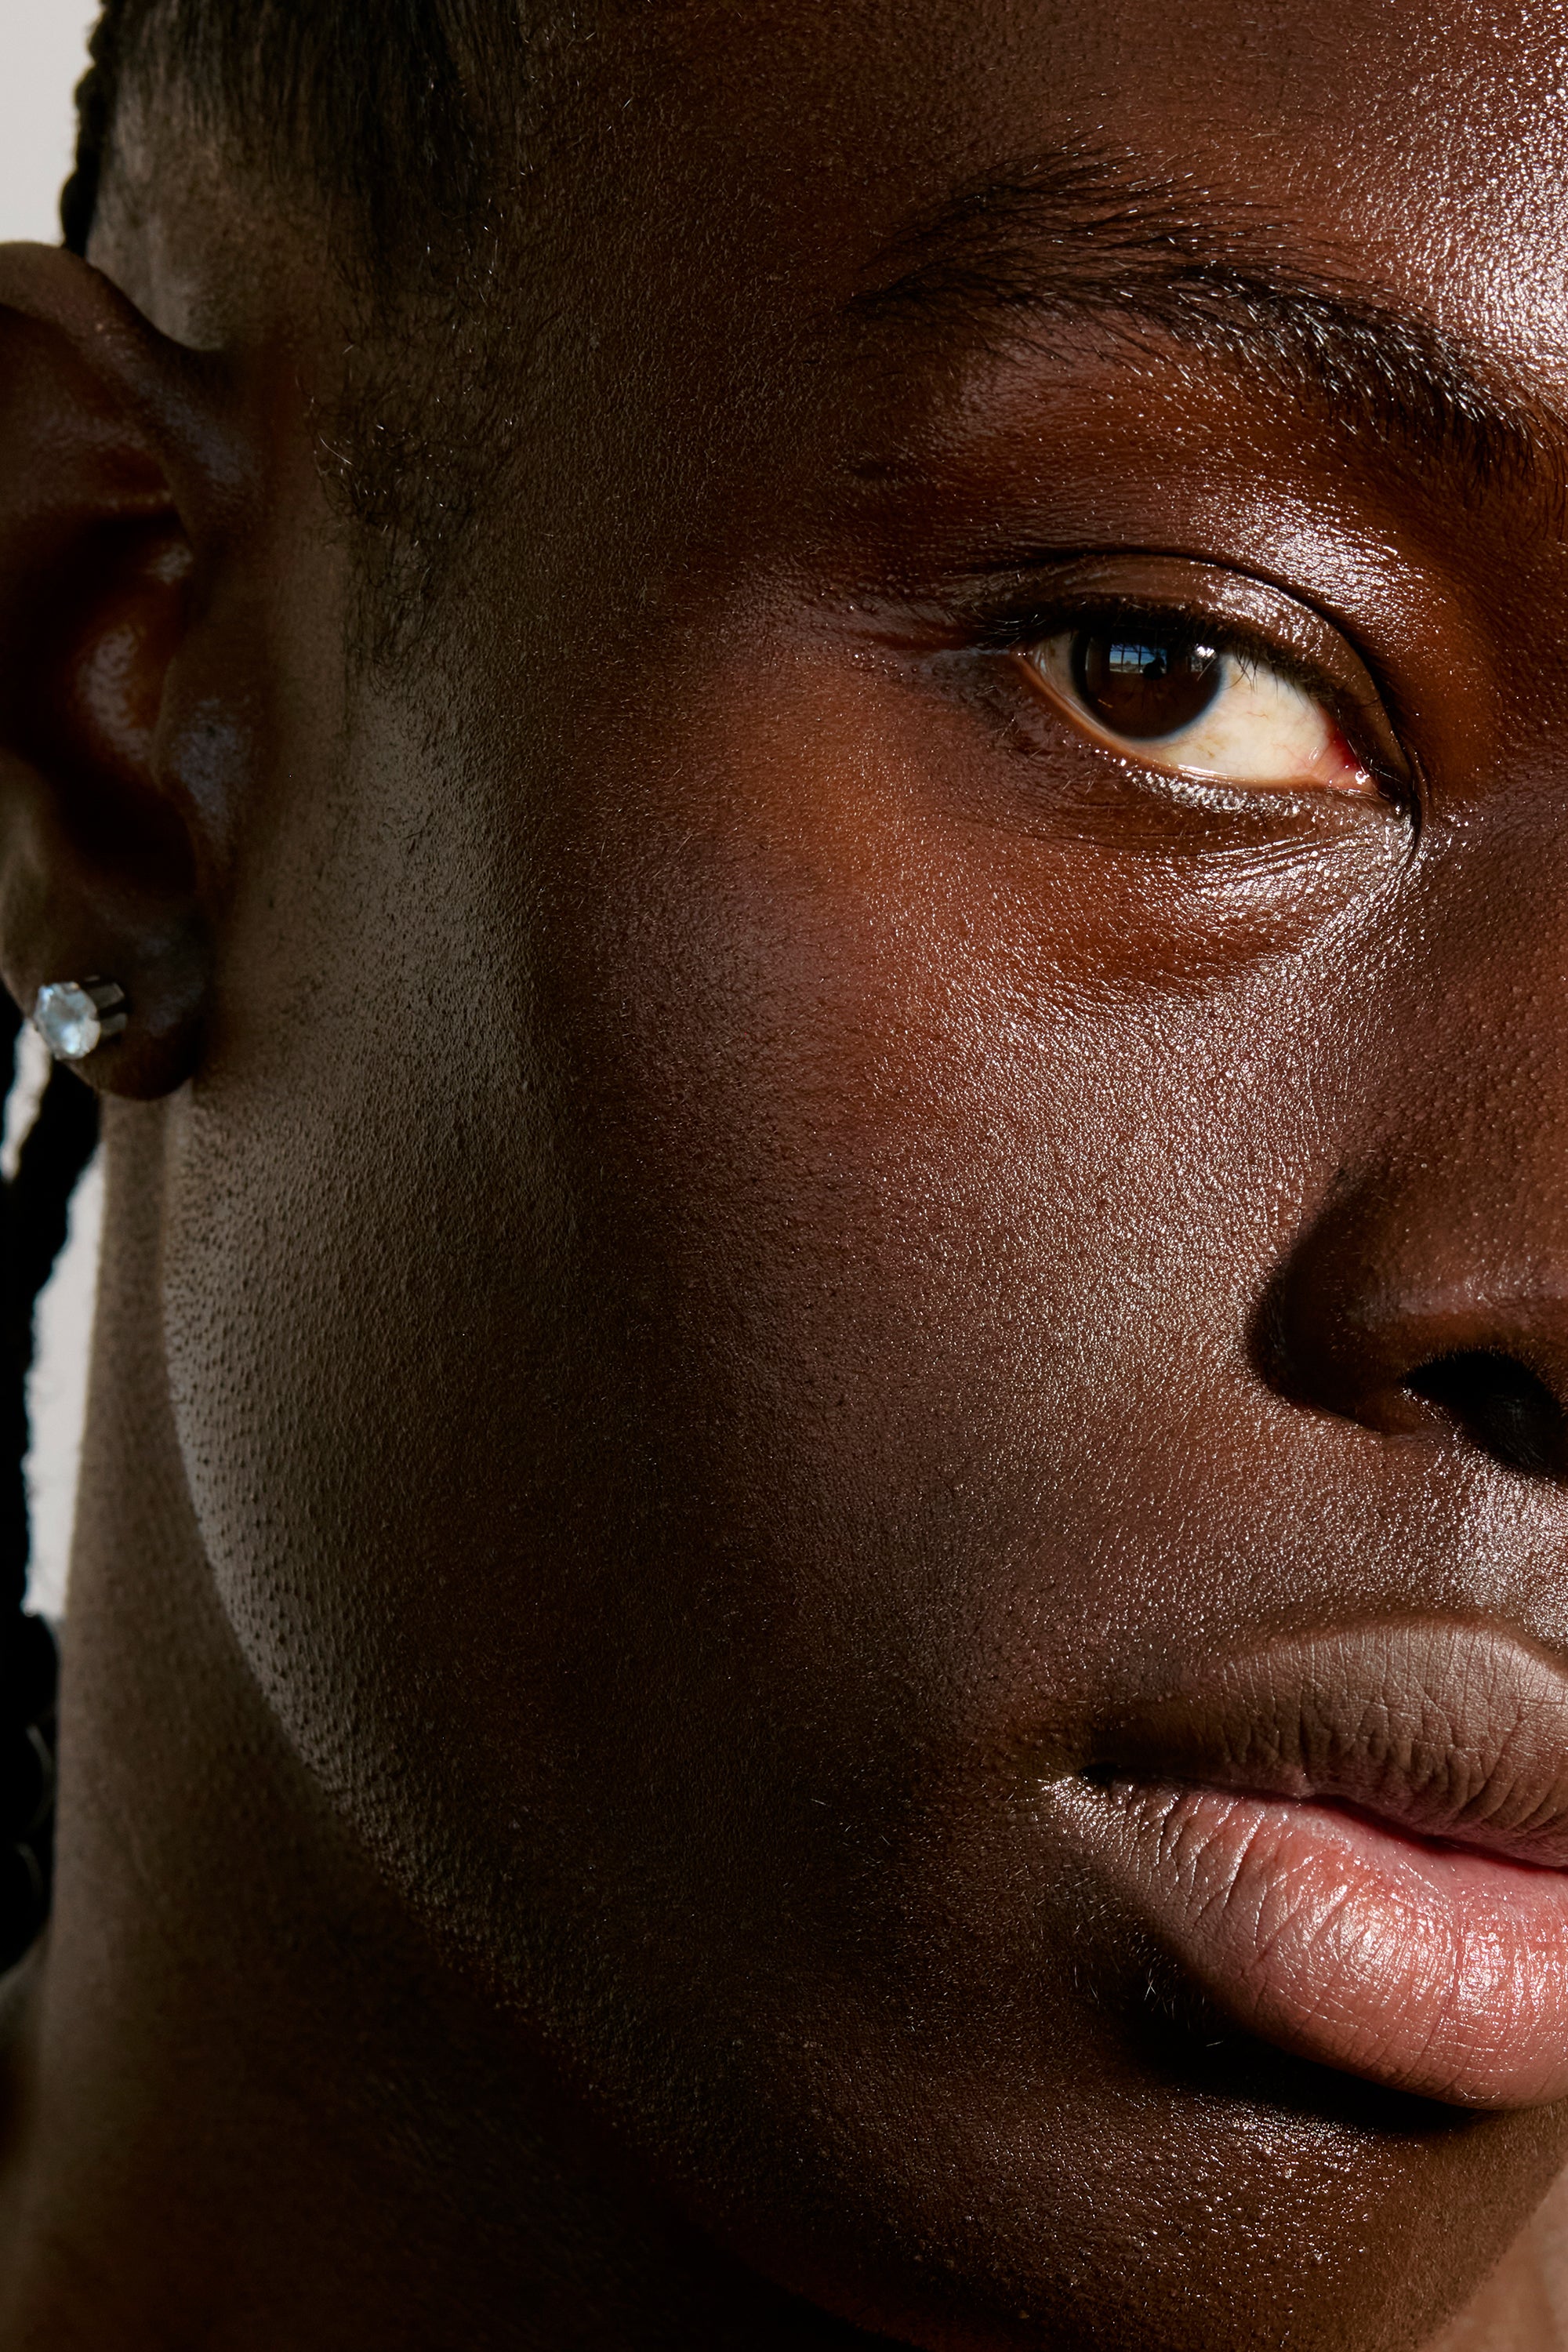 Close-up of half of a person's face with dark brown skin, focusing on the right eye, ear, and part of the nose and lips. The person has braided hair and is wearing a small, diamond stud earring. The image highlights the texture and details of the skin, reflecting Freaks of Nature Skincare's Deeper Dive Moisturizer's nourishing effects.